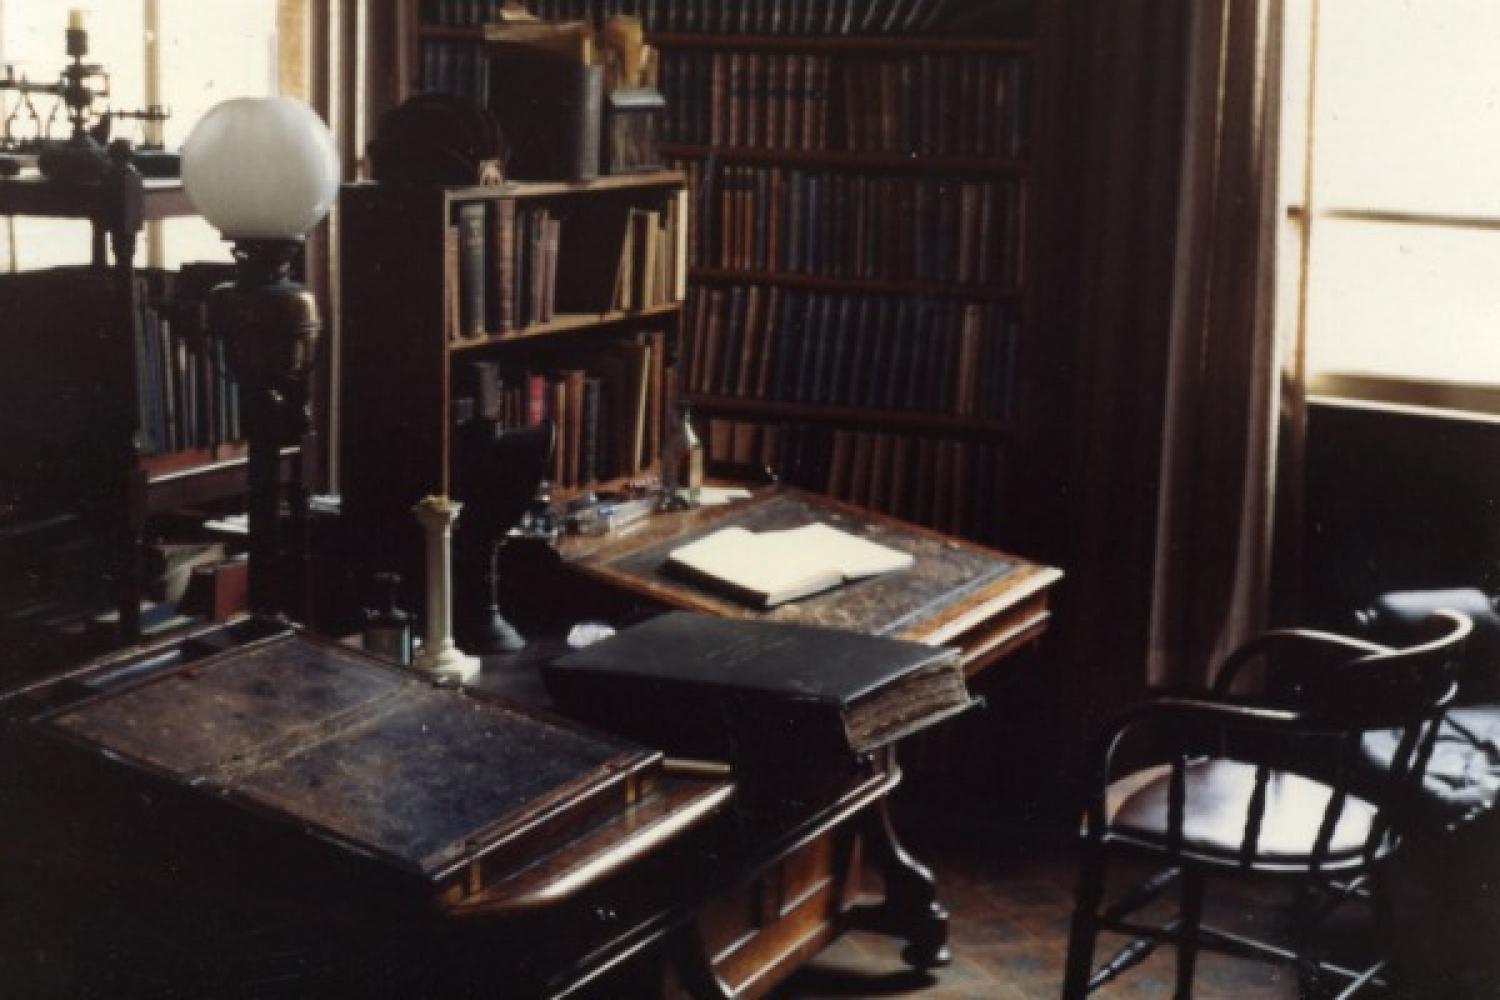 Cardinal Newman's office and desk at the Birmingham Oratory